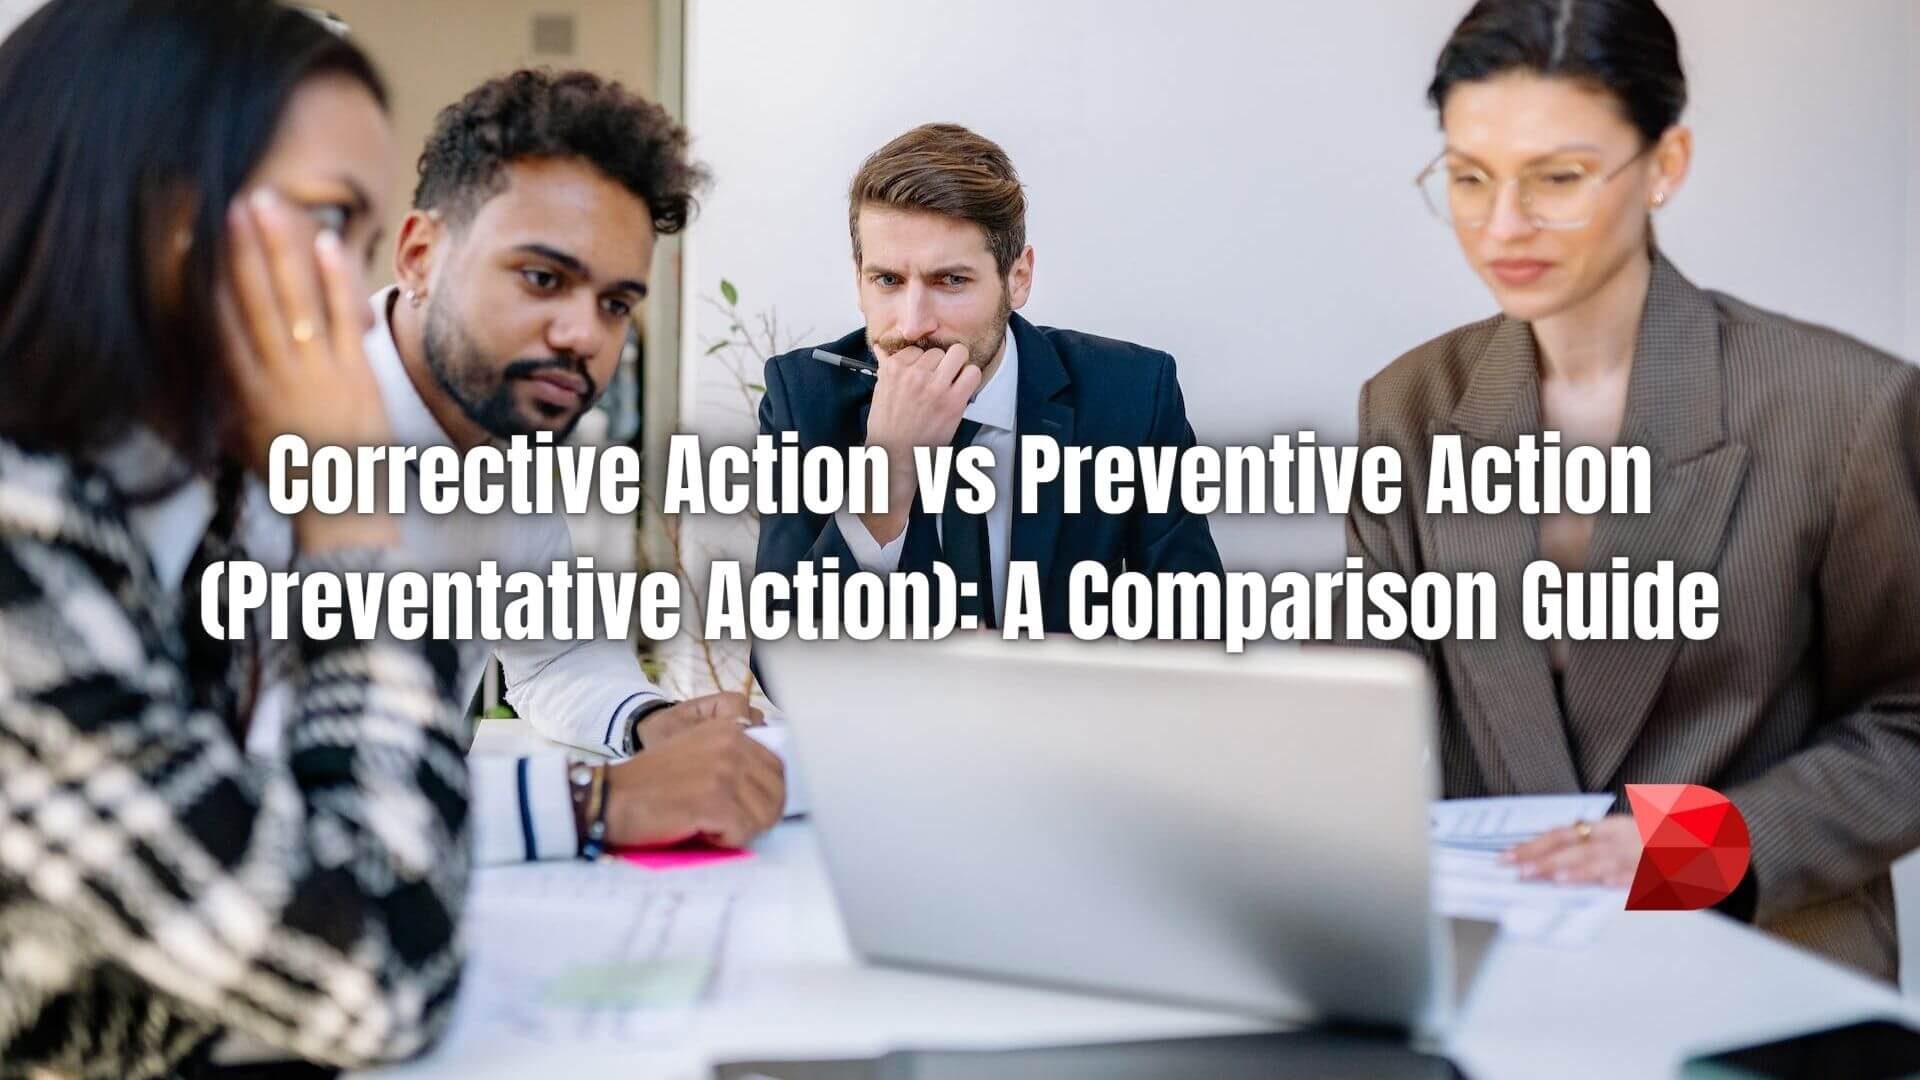 Maximize efficiency in quality management! Click here to explore the nuances of Corrective vs Preventive Action with this insightful guide.